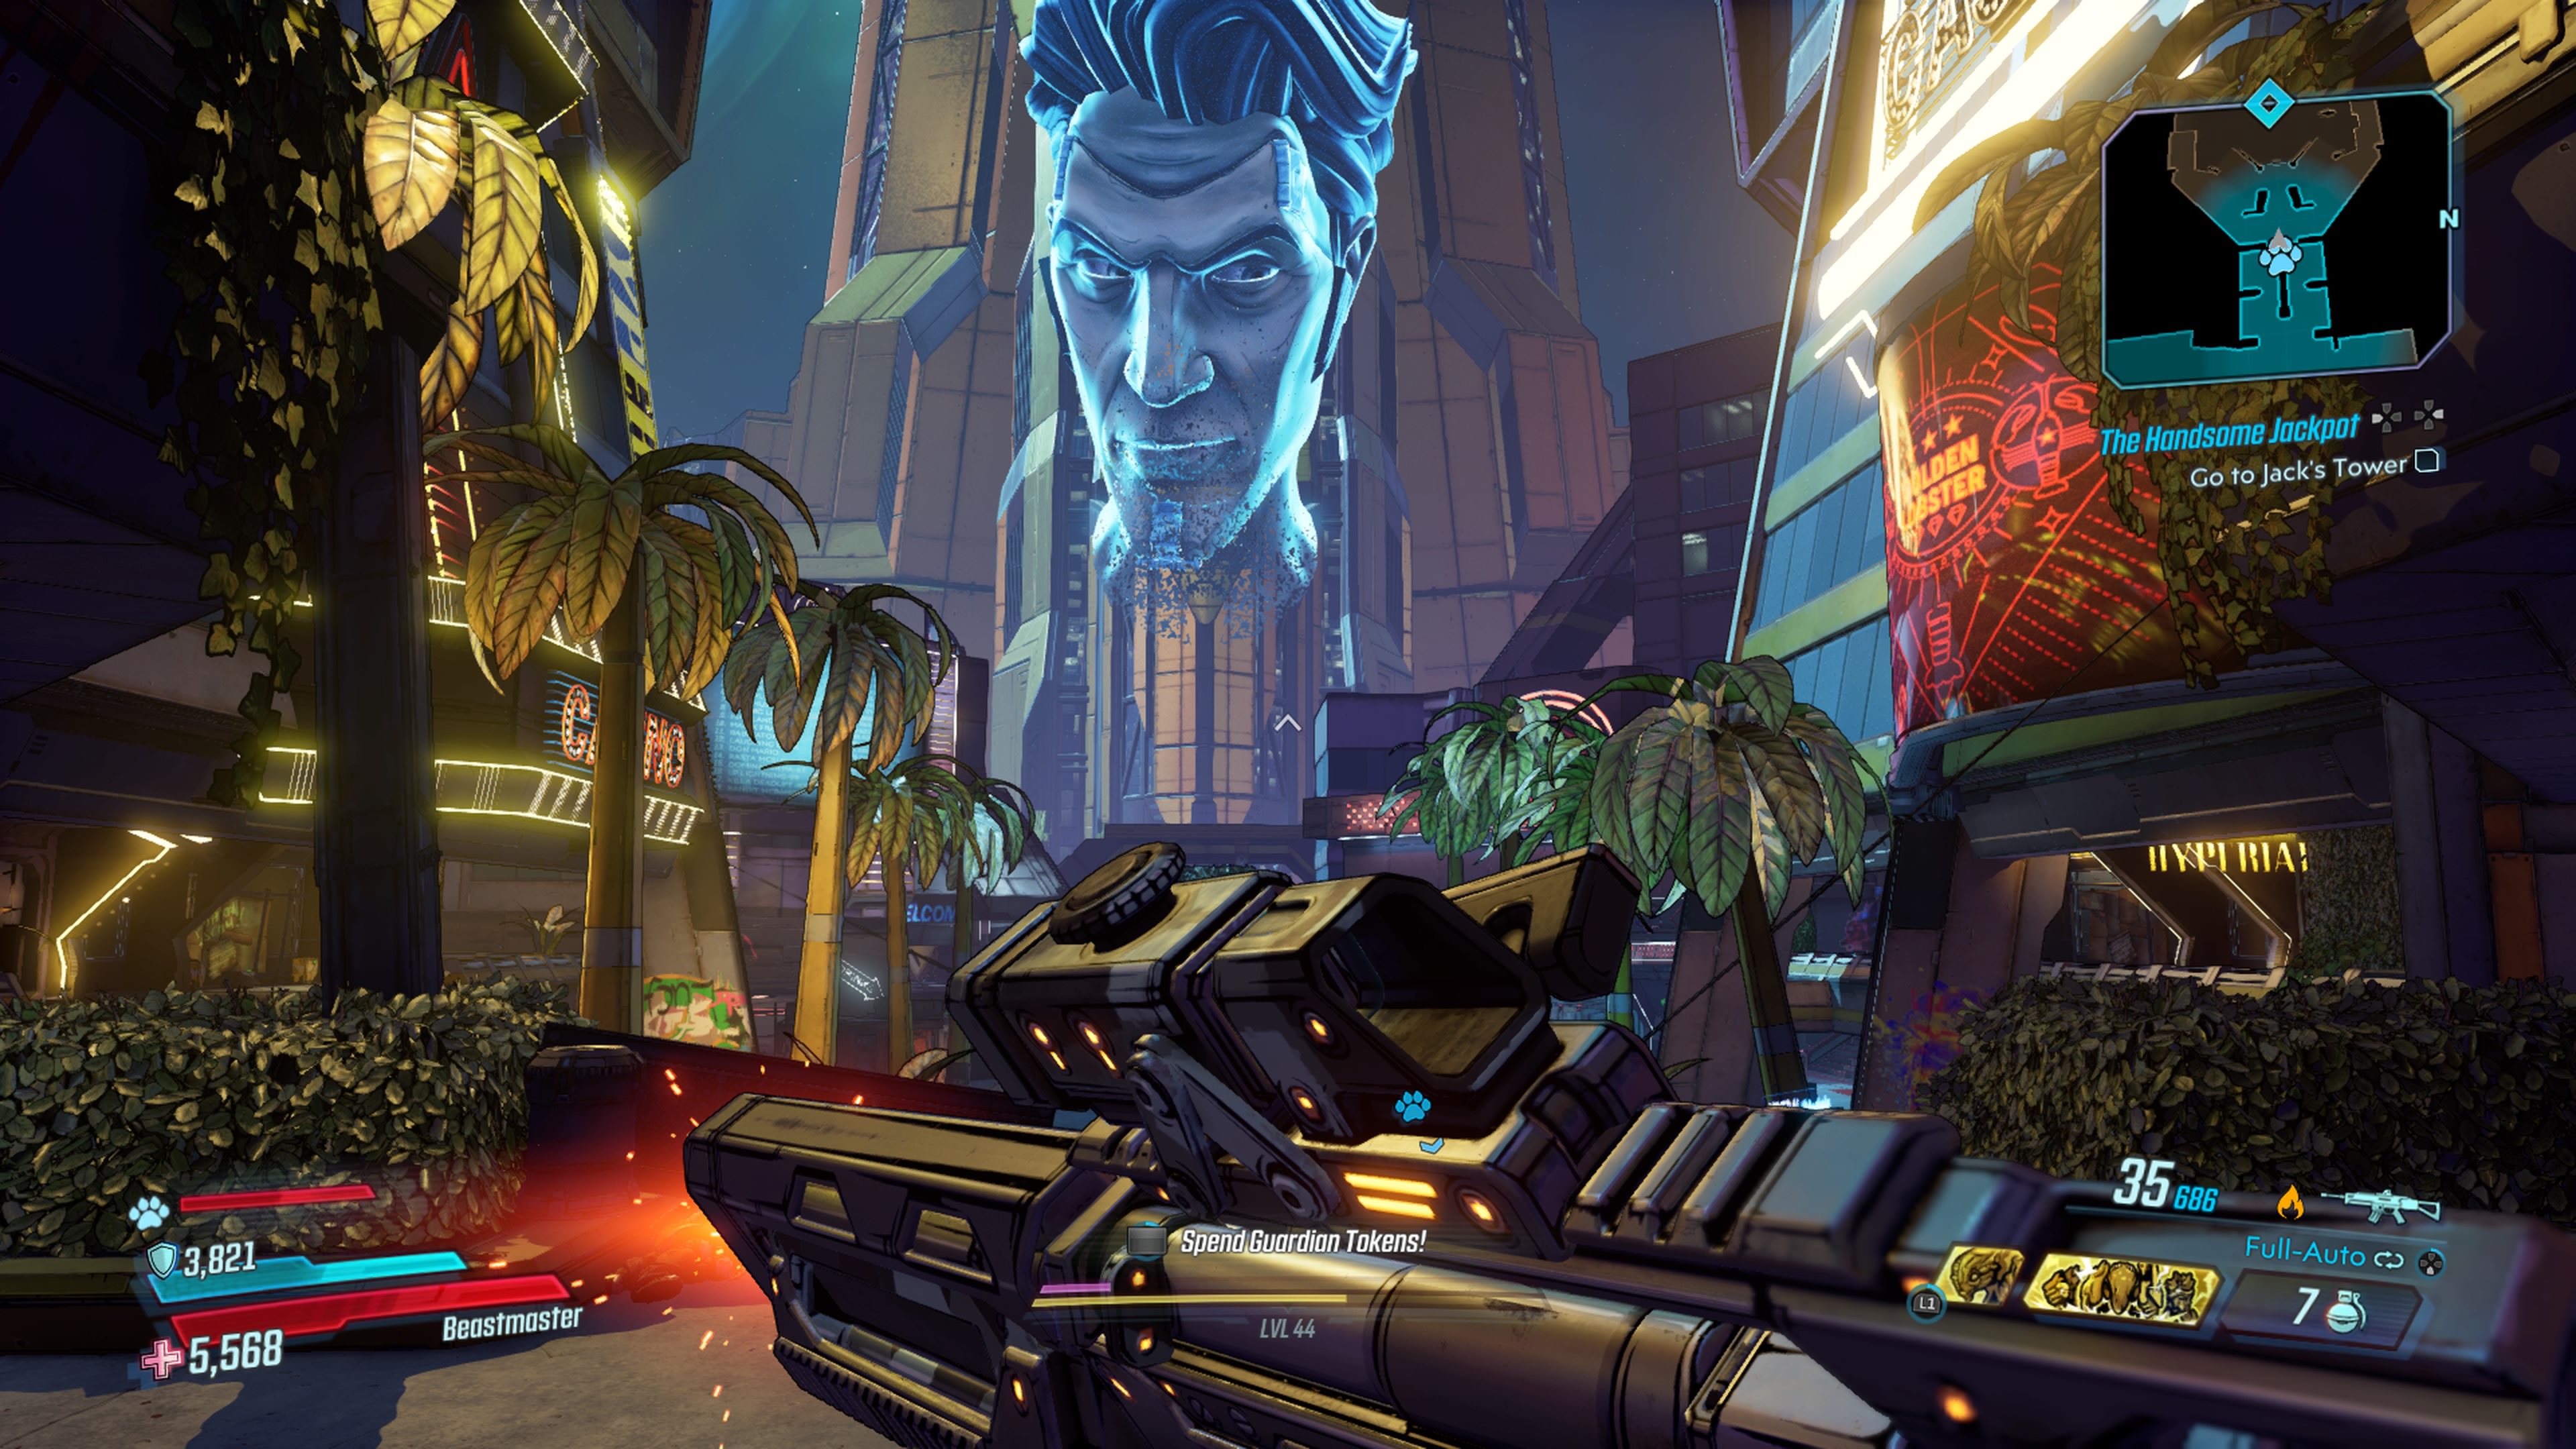 Borderlands 3 Crossplay Now Available Outside of PlayStation Platforms – Gameranx